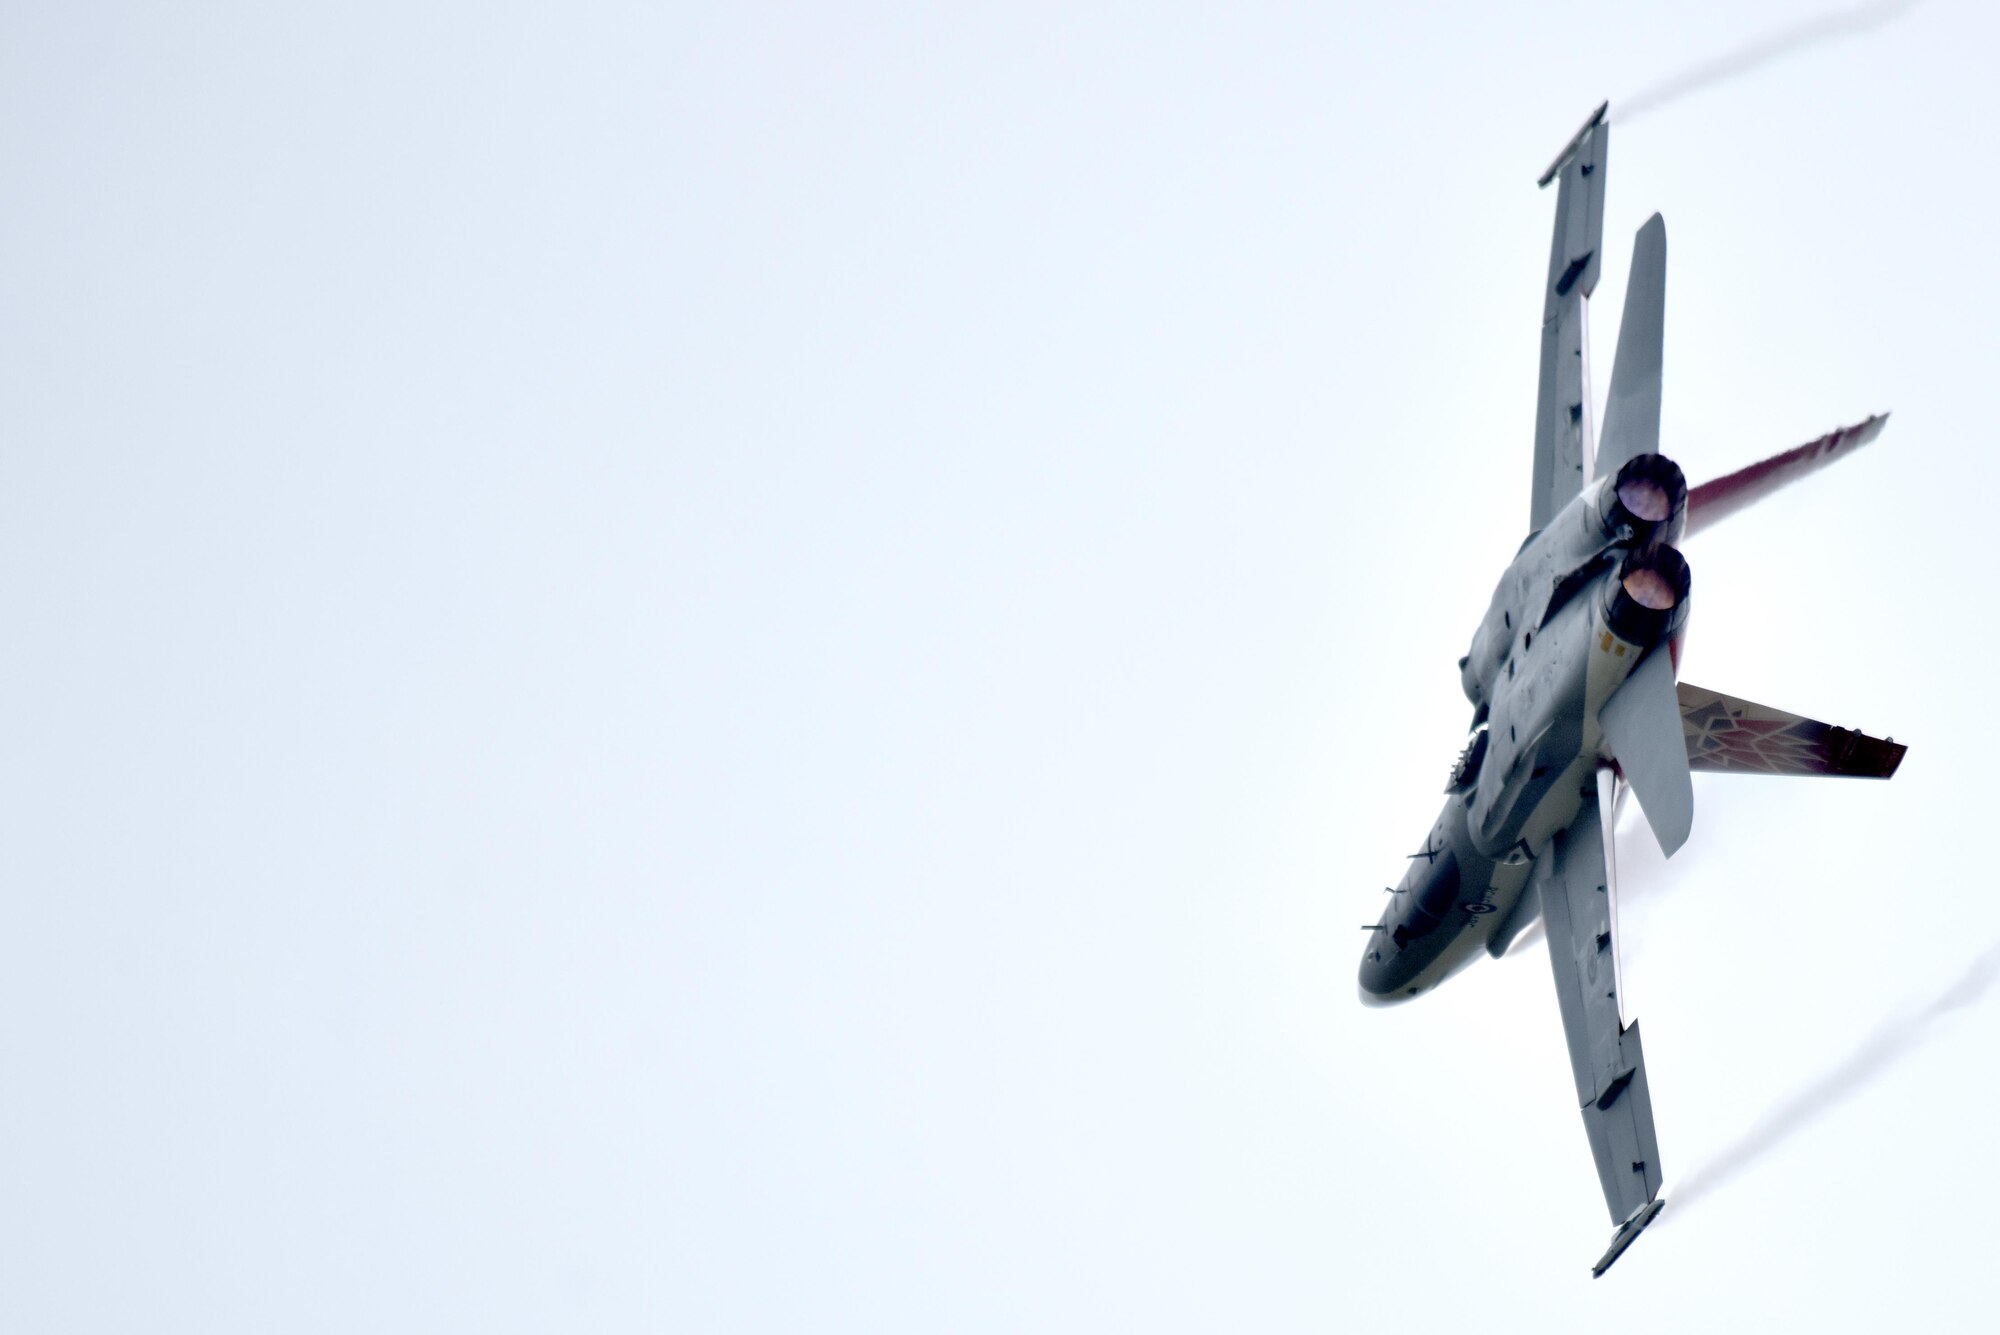 Capt. Matthew Kutryk, Royal Canadian Air Force pilot, flies a specially painted CF-18 Hornet commemorating Canada’s 150th Anniversary of Confederation during the Wings Over Wayne Air Show, May 21, 2017, at Seymour Johnson Air Force Base, North Carolina. The air show is a way for Seymour Johnson AFB to thank local and regional communities for their ongoing support of the base’s missions. (U.S. Air Force photo by Airman 1st Class Christopher Maldonado)